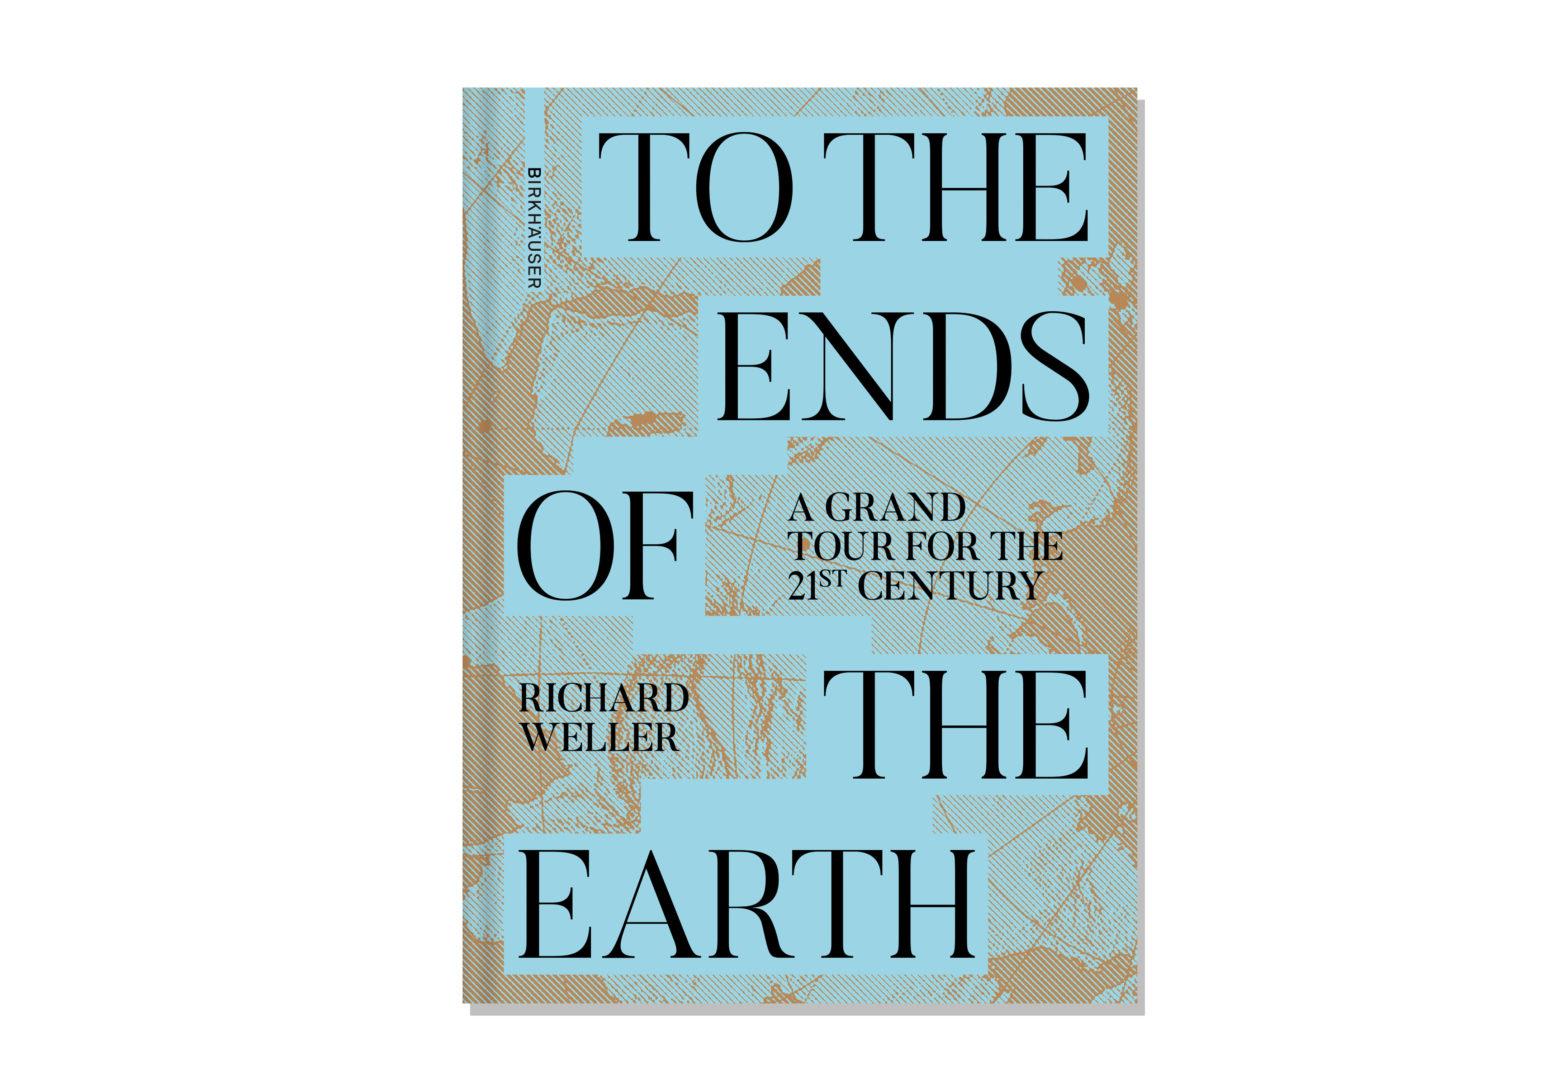 To the Ends of the Earth | Book presentation and exhibition